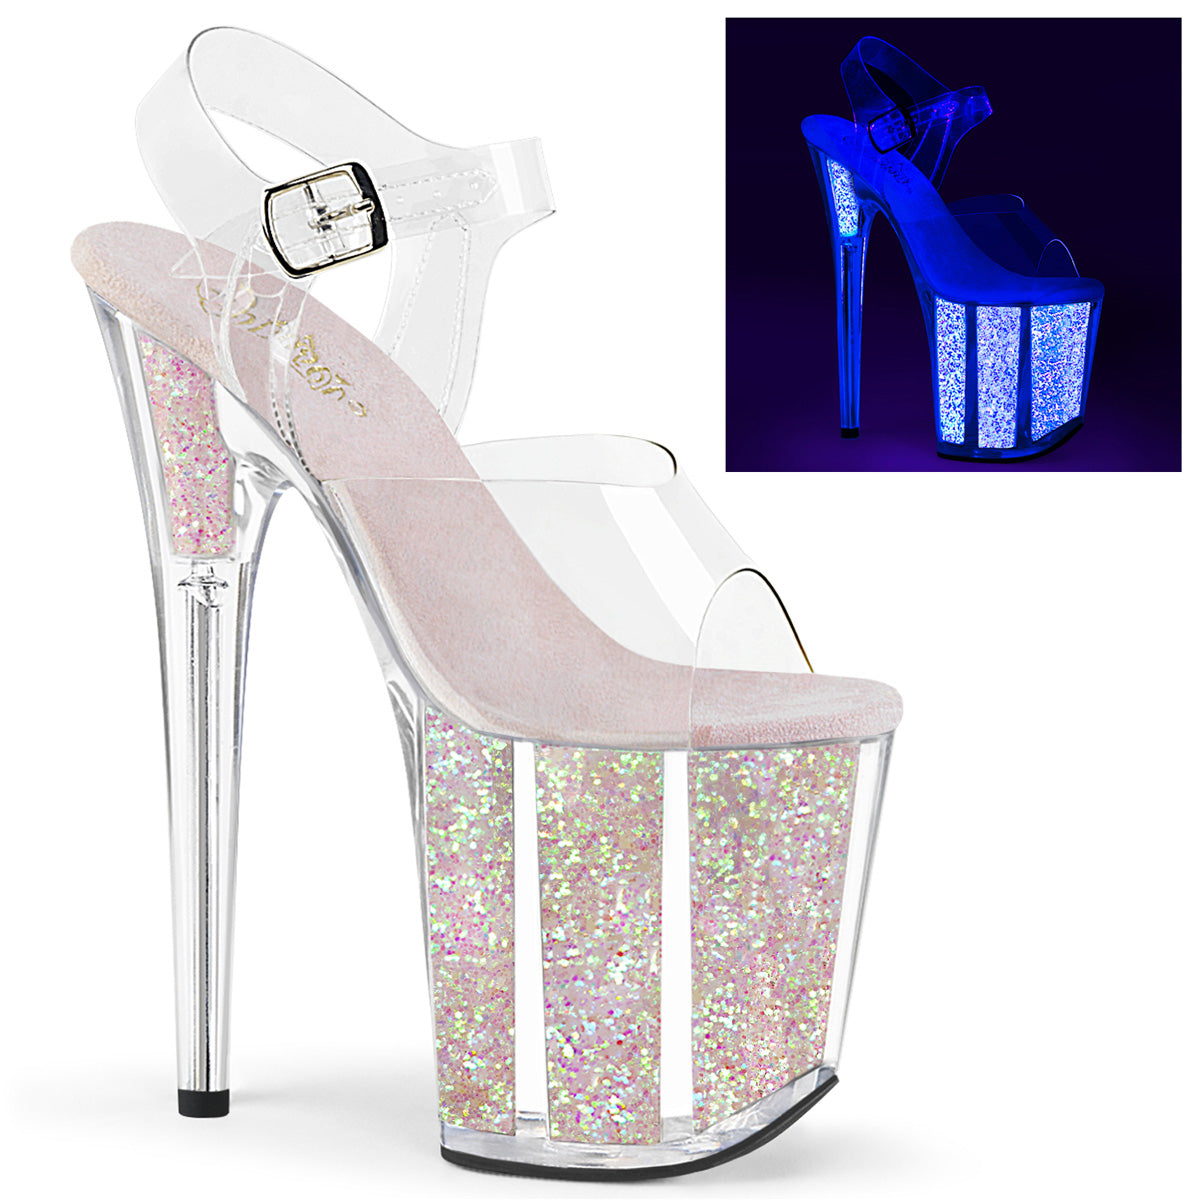 FLAMINGO-808UVG 8" Heel Clear Neon Glitter Exotic Dancing Shoes